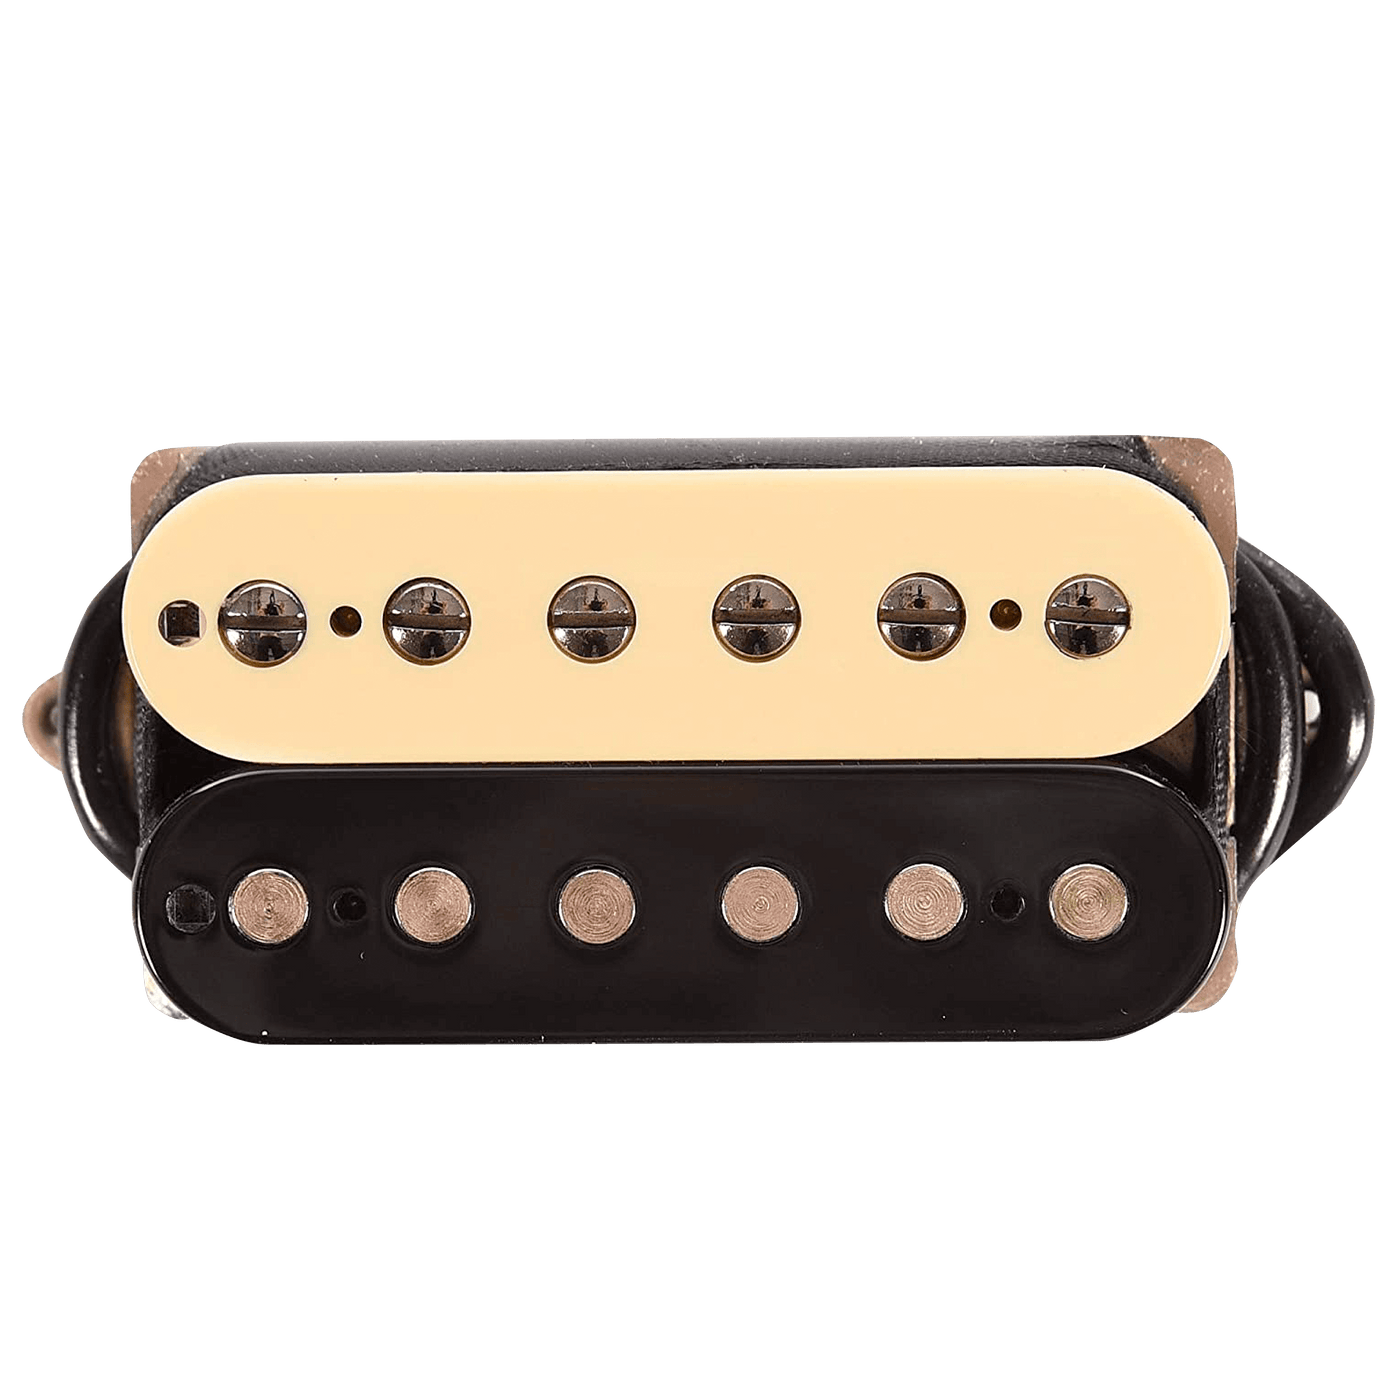 Suhr Thornbucker Plus Signature Humbucker Zebra (Bridge) - $169990 - Gearhub - “We are happy to introduce the new Thornbucker + bridge pickup. It retains all the clarity, warmth, character, and mojo of the original Thornbuckers, and adds a bit more power and oomph. Great for players that like a slightly overwound PAF-type tone!”. “We’re overjoyed with the enthusiasm from players for the Thornbucker humbucking pickups! The pickups have been a resounding success, garnering praise for their extraordinary tone